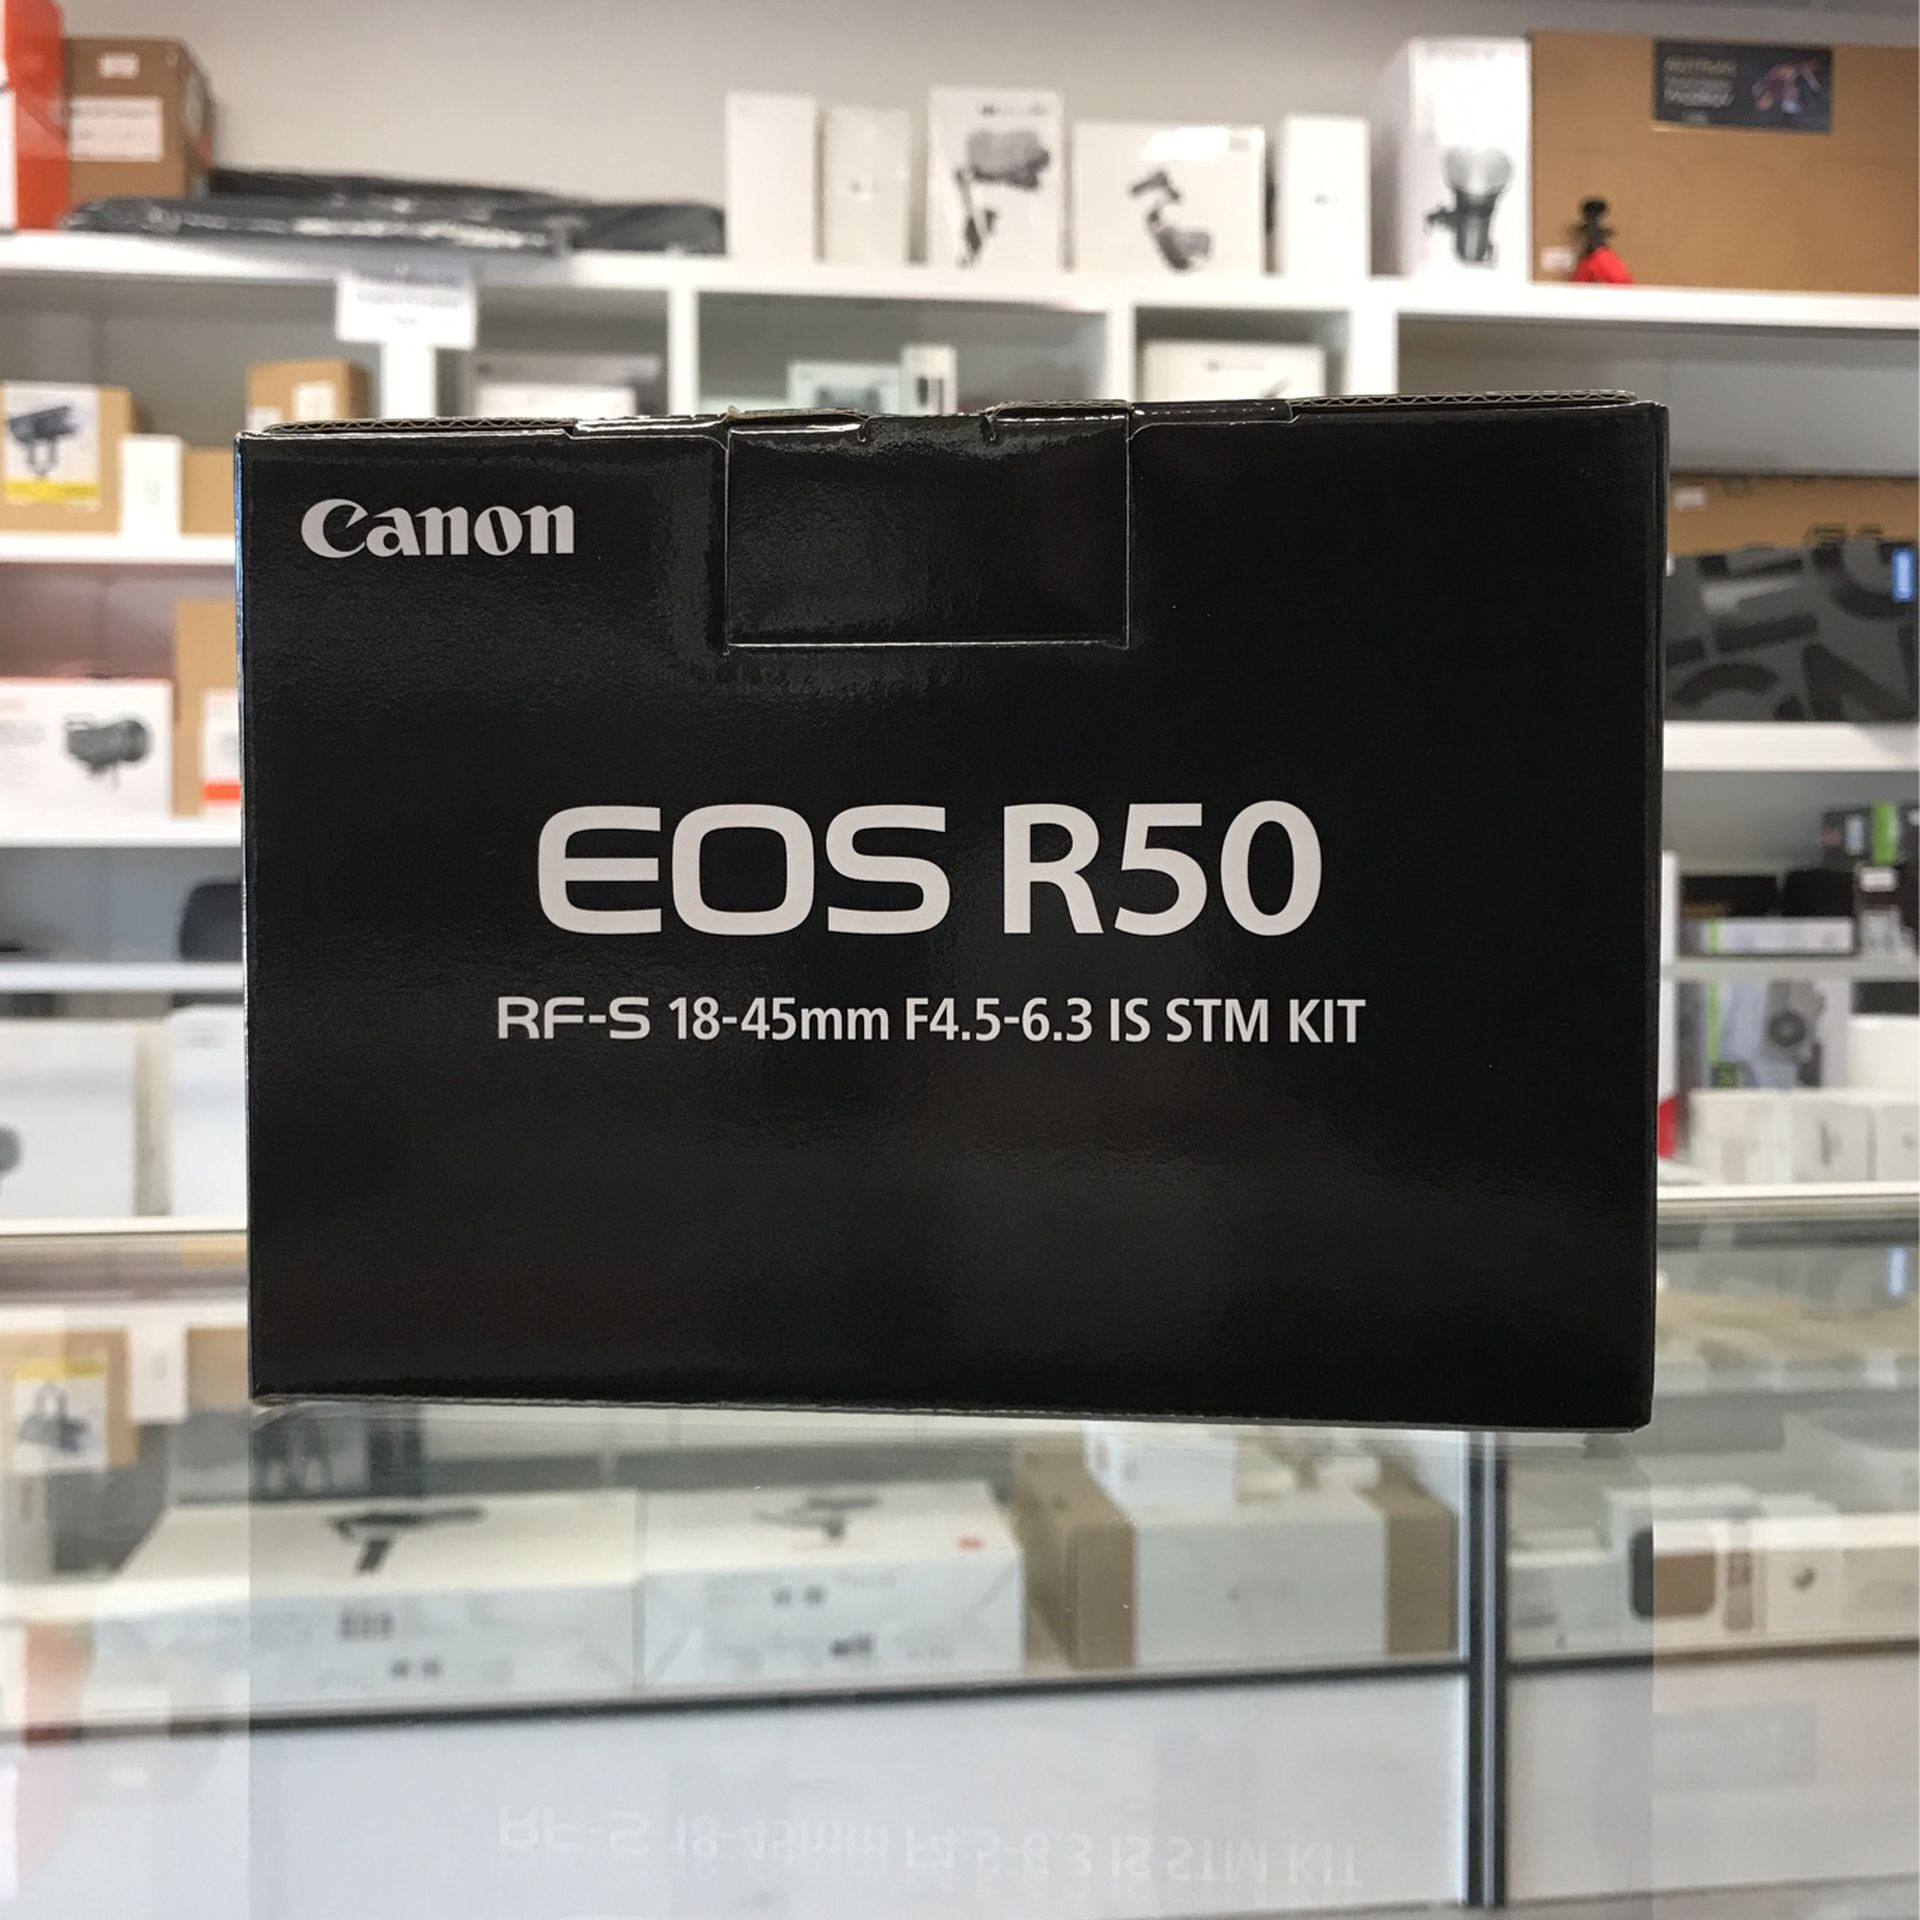 Canon EOS R50 Kit (RF-S 18-45mm F4.5-6.3 IS STM)